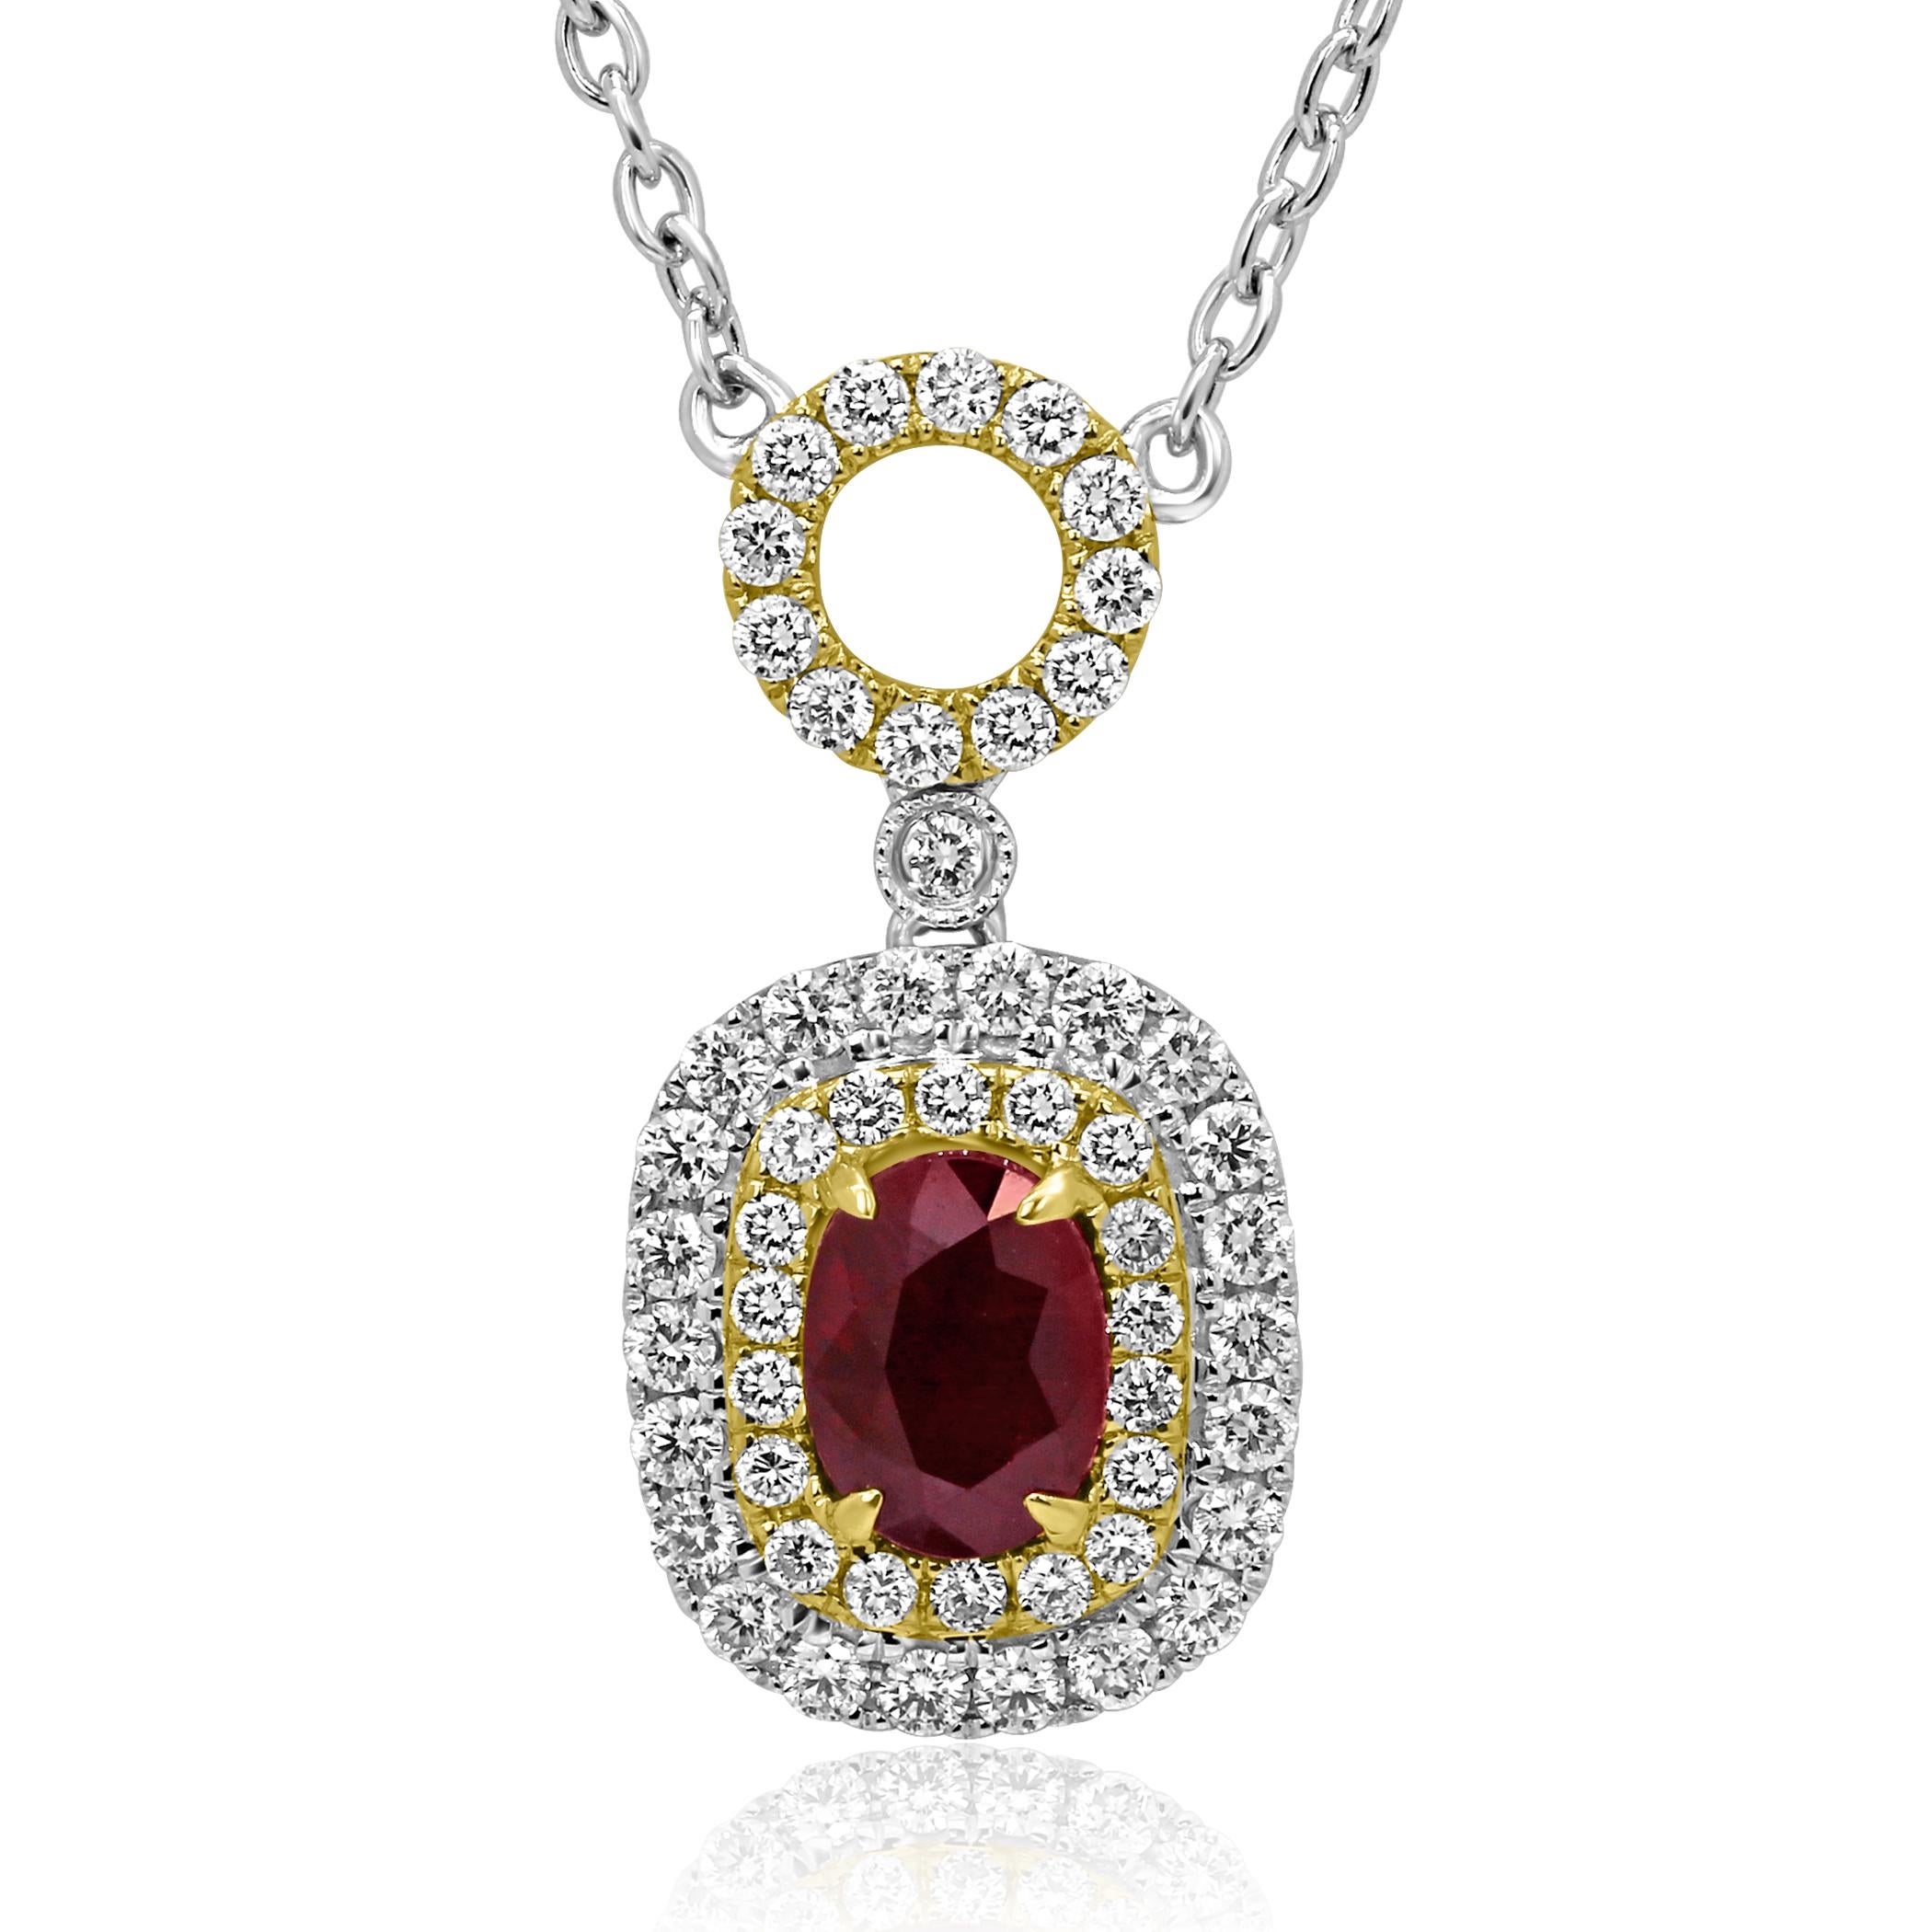 Stunning Ruby Oval 0.95 Carat Encircled in Double Halo of White G-H Color VS-SI Diamond Round 0.70 Carat in 14K White and Yellow Gold Drop Pendant Necklace in Diamond by Yard Chain. Total Weight 1.65 Carat

Style available in different price ranges.